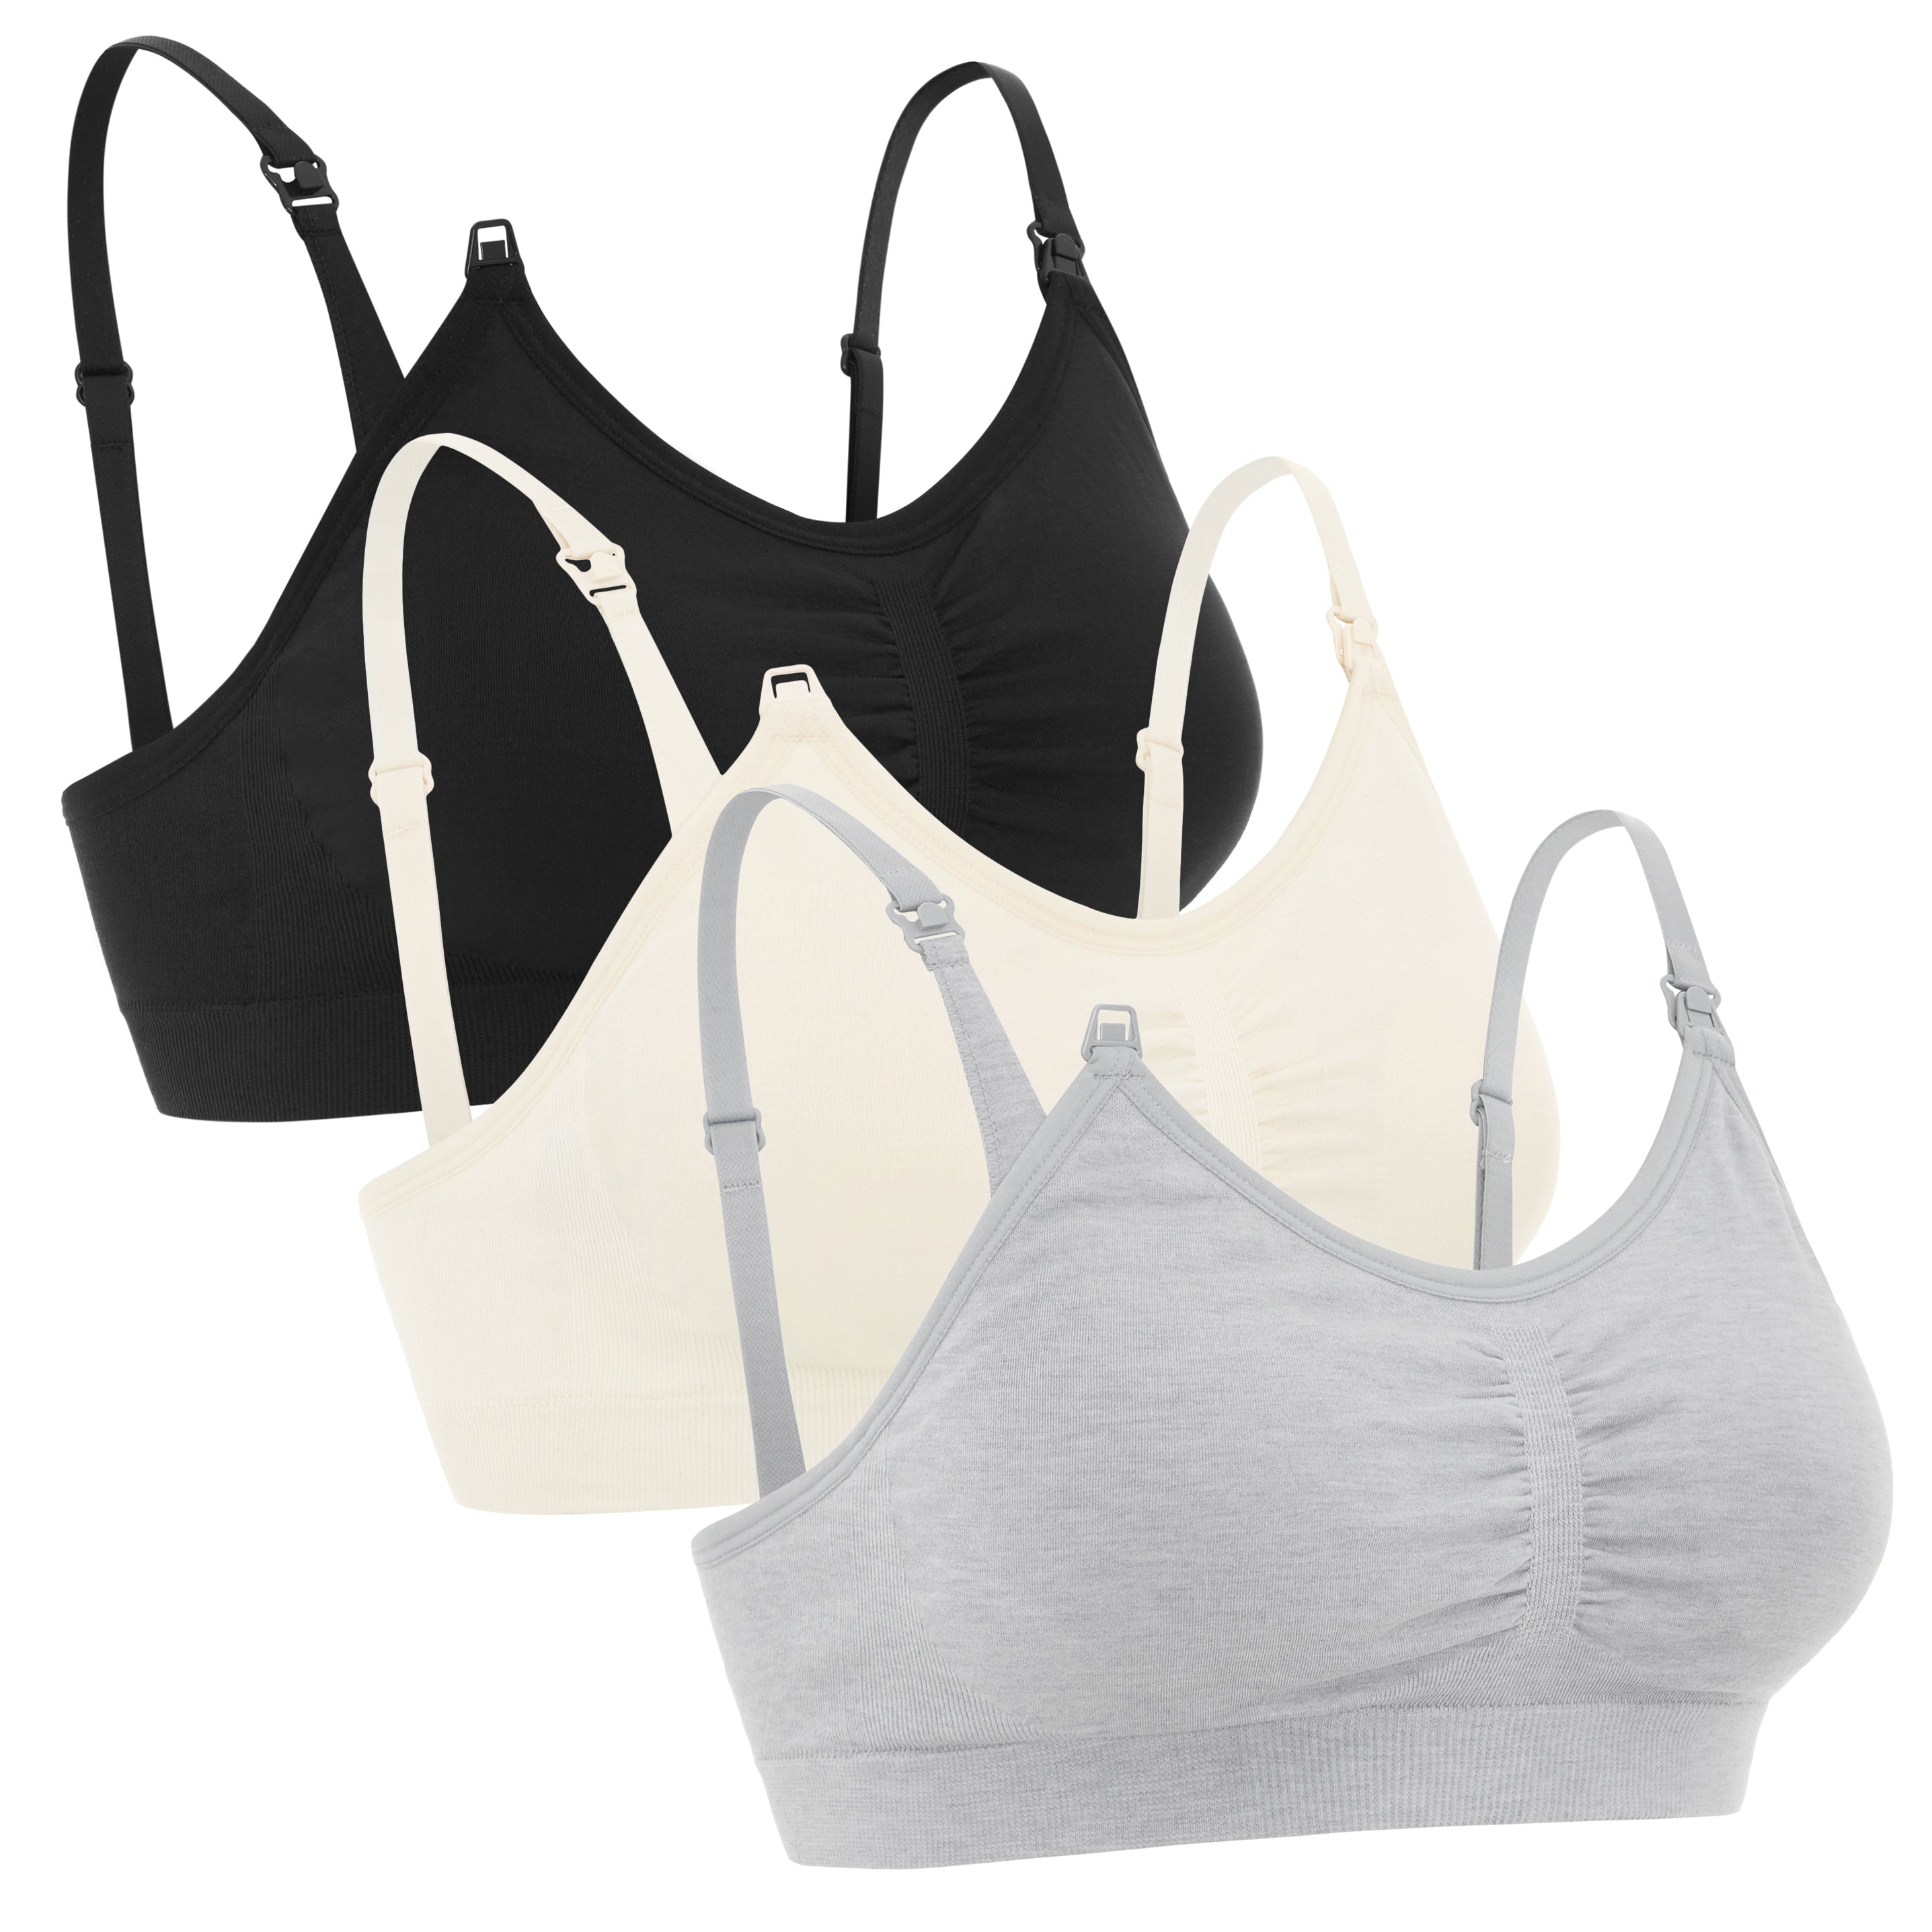 Midnightdivas - Smoothing Maternity Bra <3 Free Maternity Panty with every  purchase! Our top-rated seamless bra is for now to nursing! In full-busted,  extended sizes, this bra is soft with support and